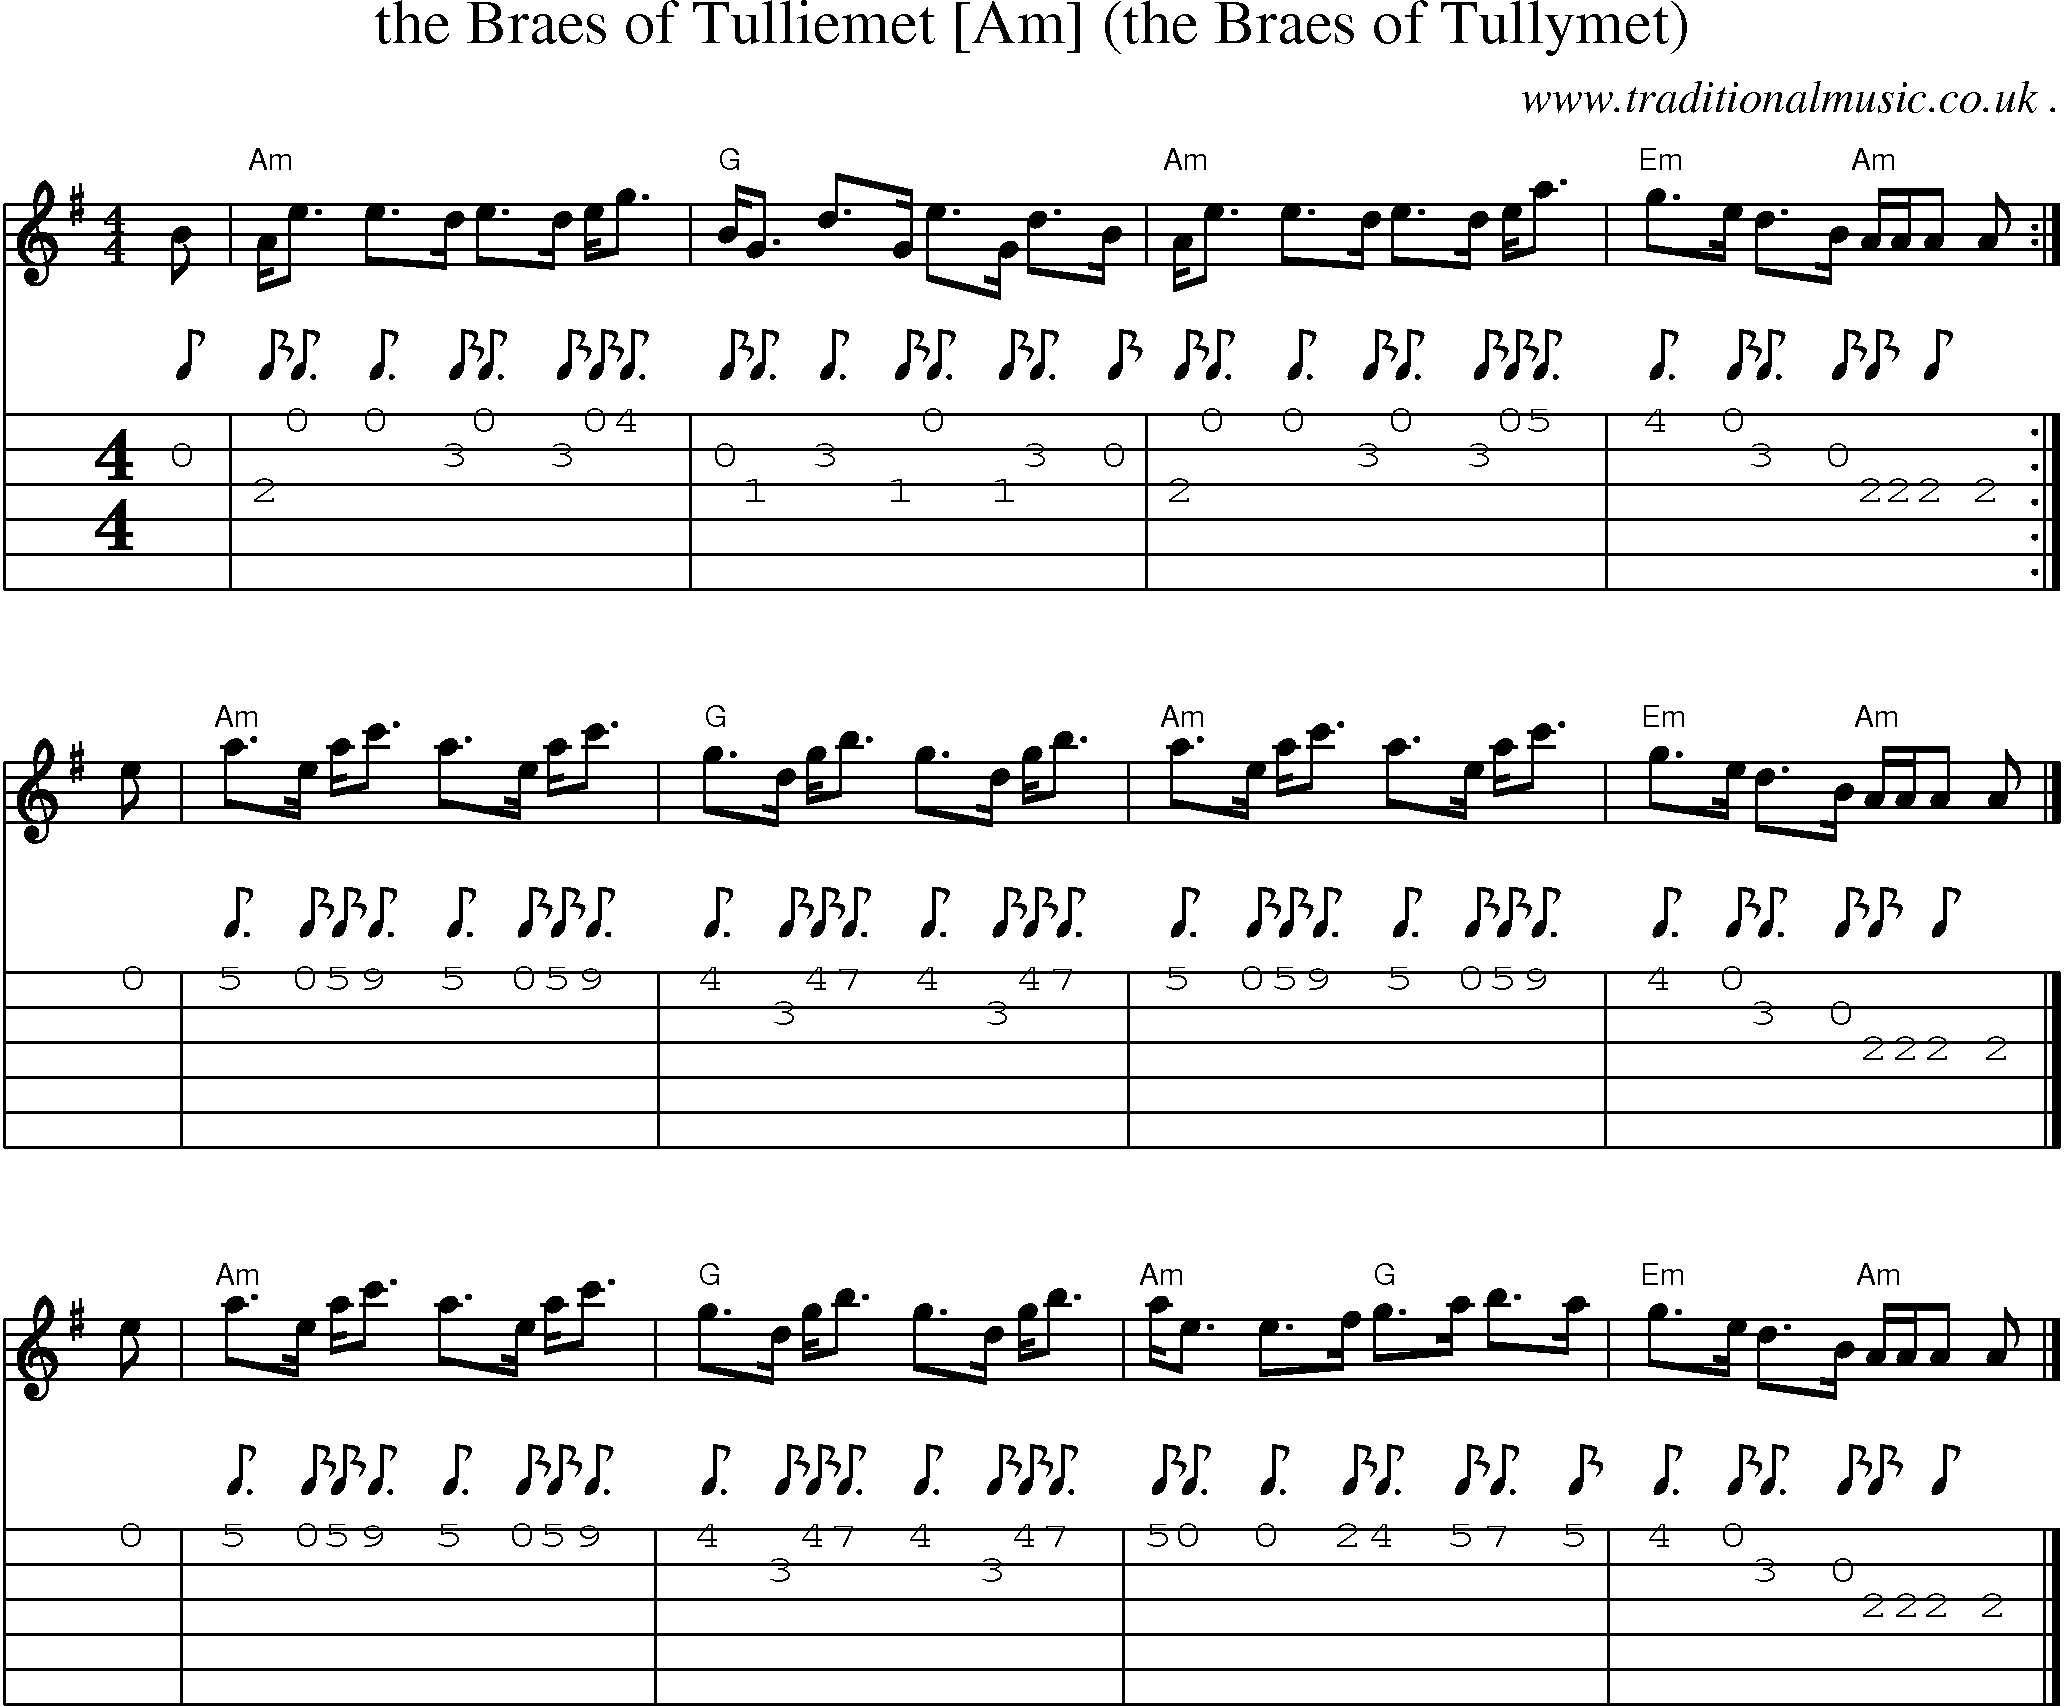 Sheet-music  score, Chords and Guitar Tabs for The Braes Of Tulliemet [am] The Braes Of Tullymet